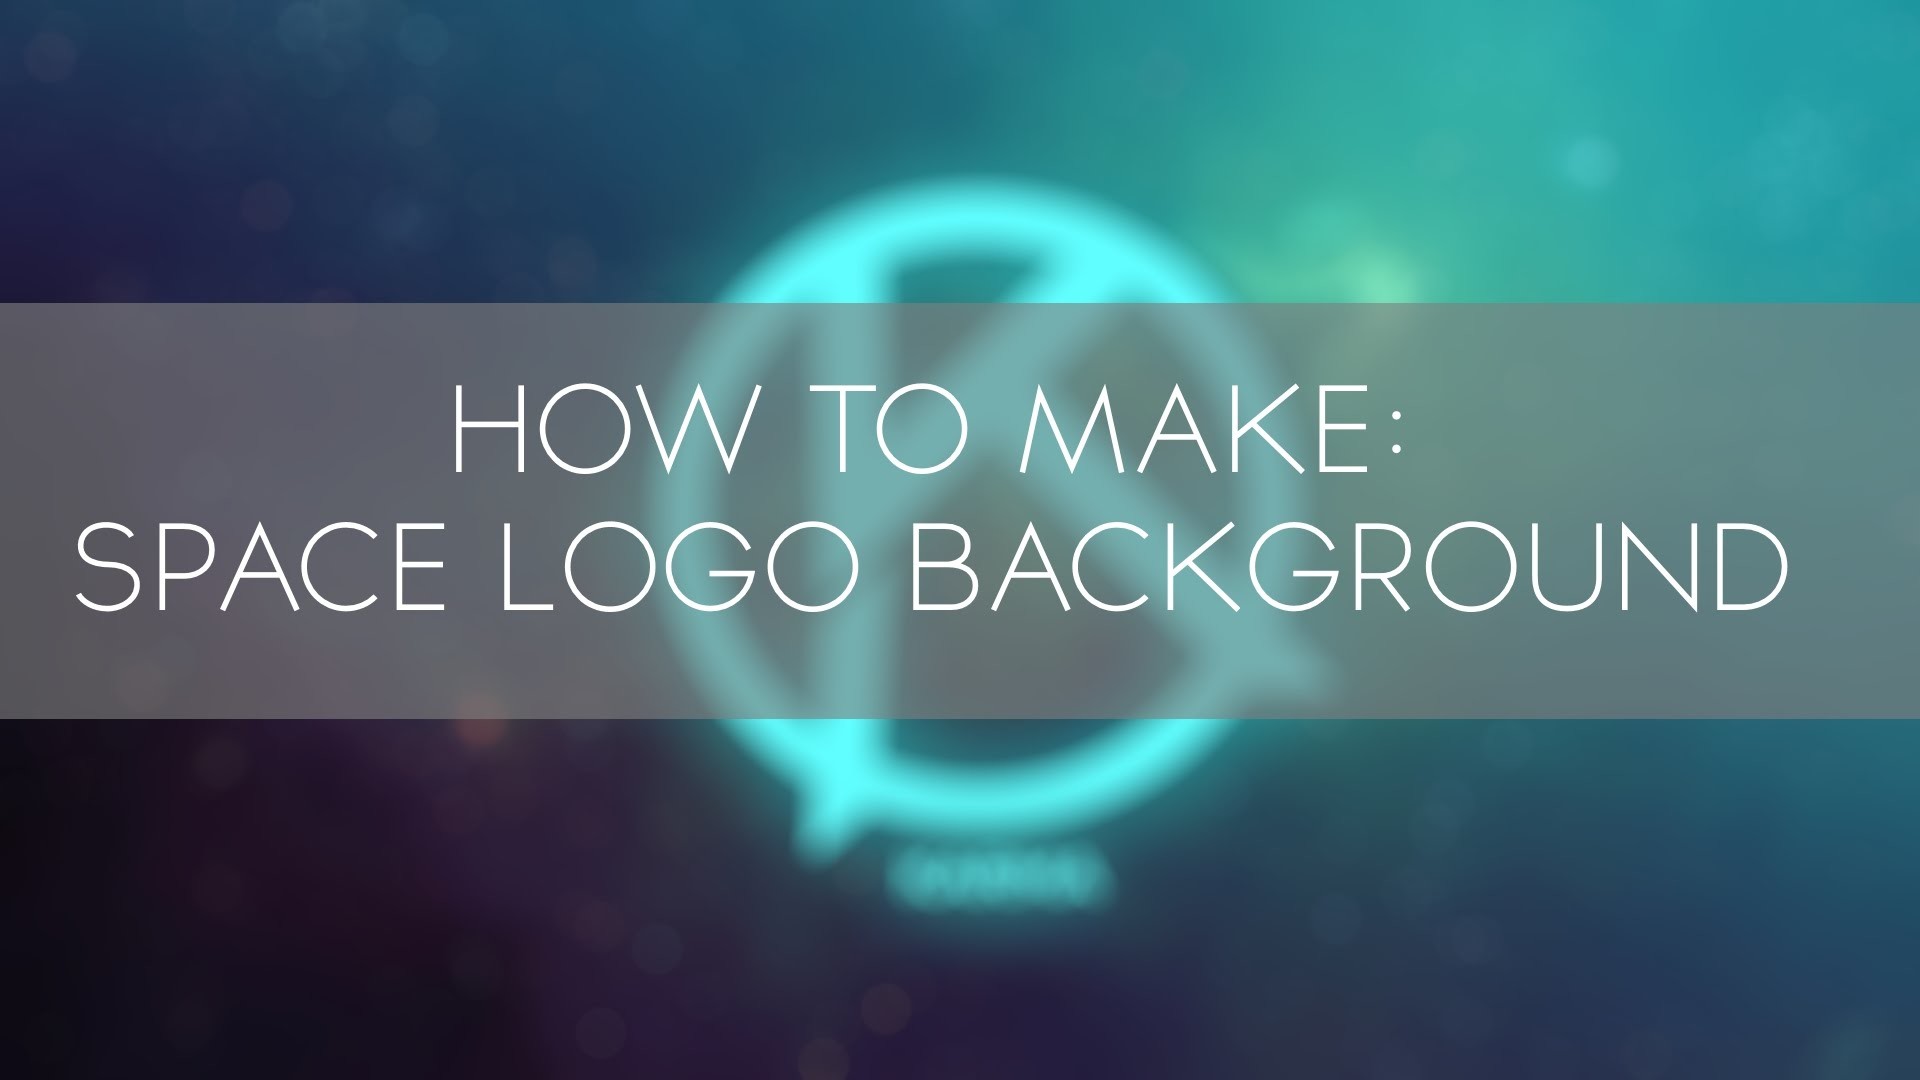 1920x1080 How to make a custom logo wallpaper with a space background! [Paint.net] -  KarmaTutorials - YouTube